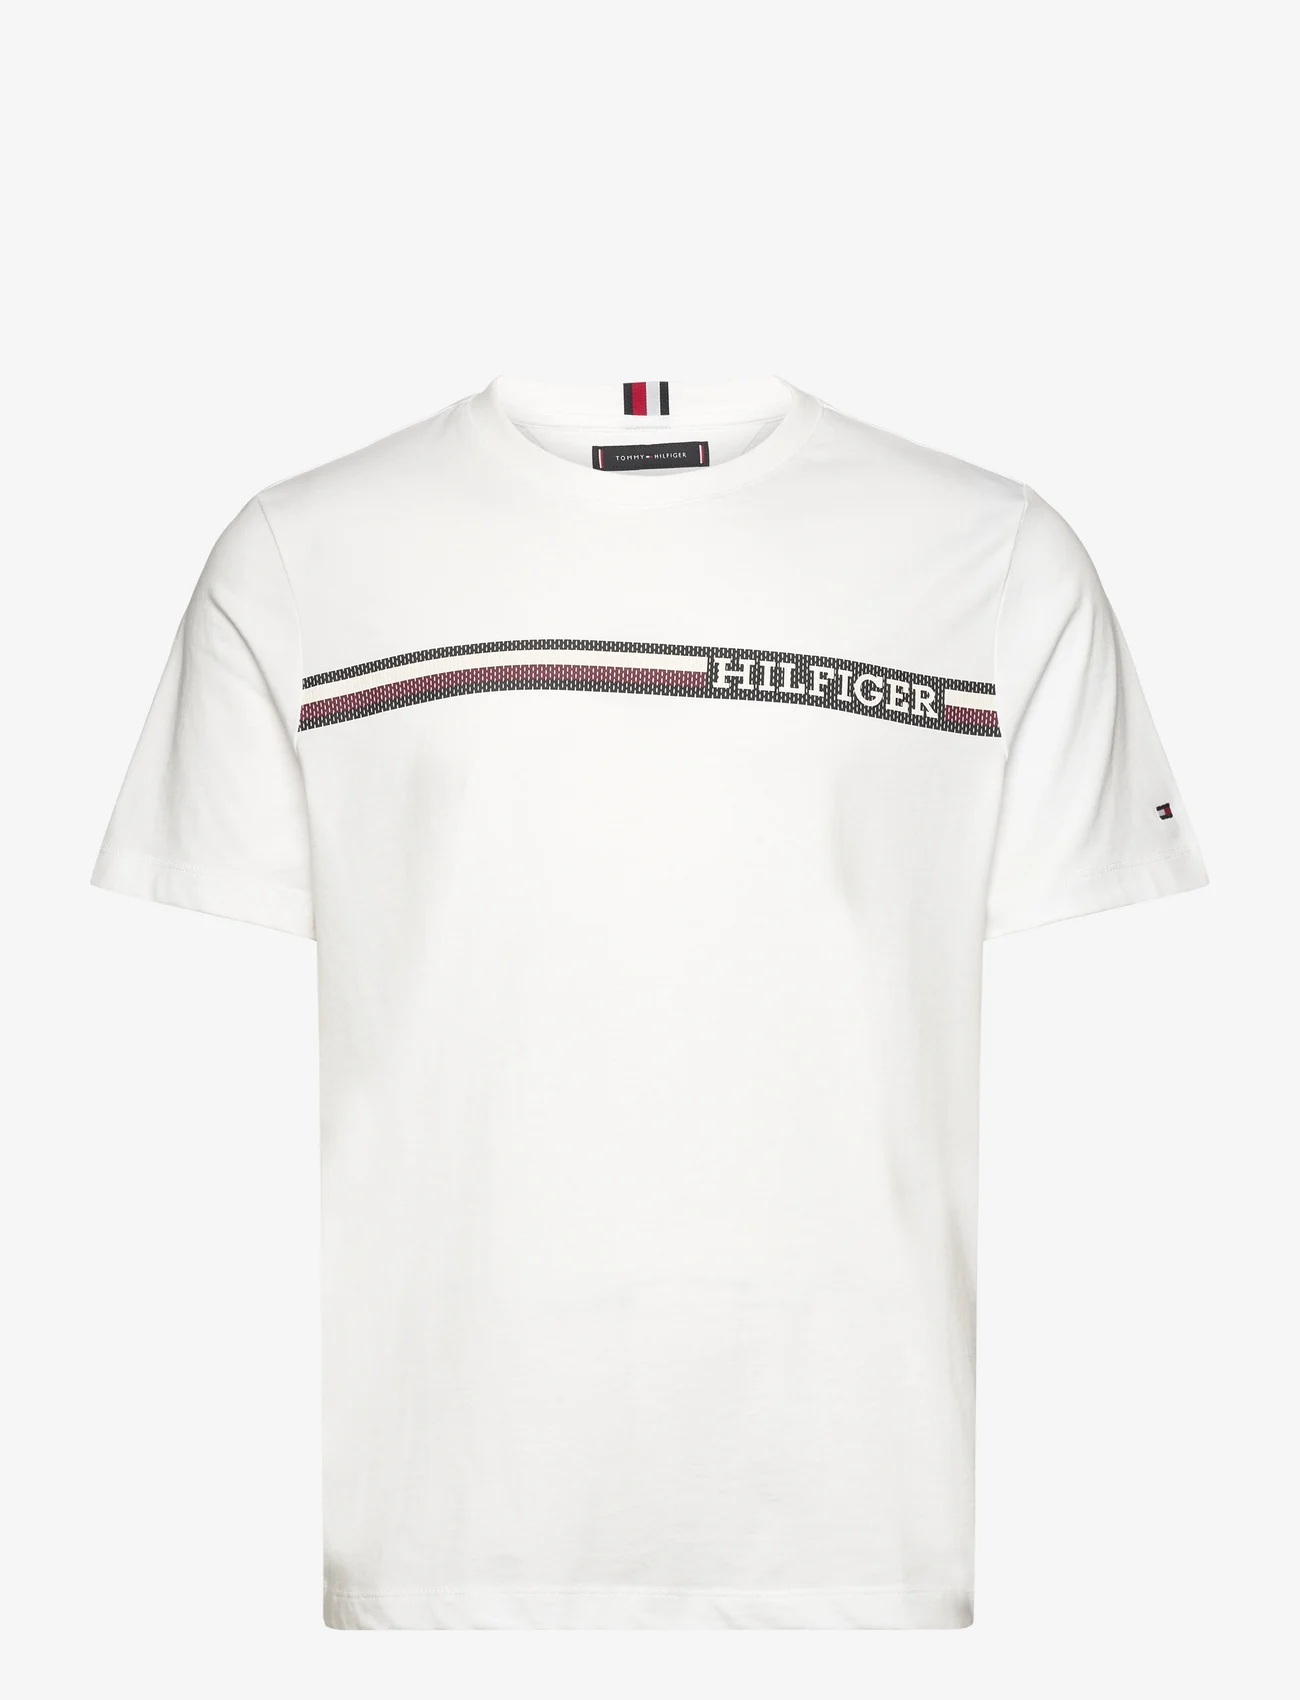 Tommy Hilfiger - MONOTYPE CHEST STRIPE TEE - basic t-shirts - white - 0